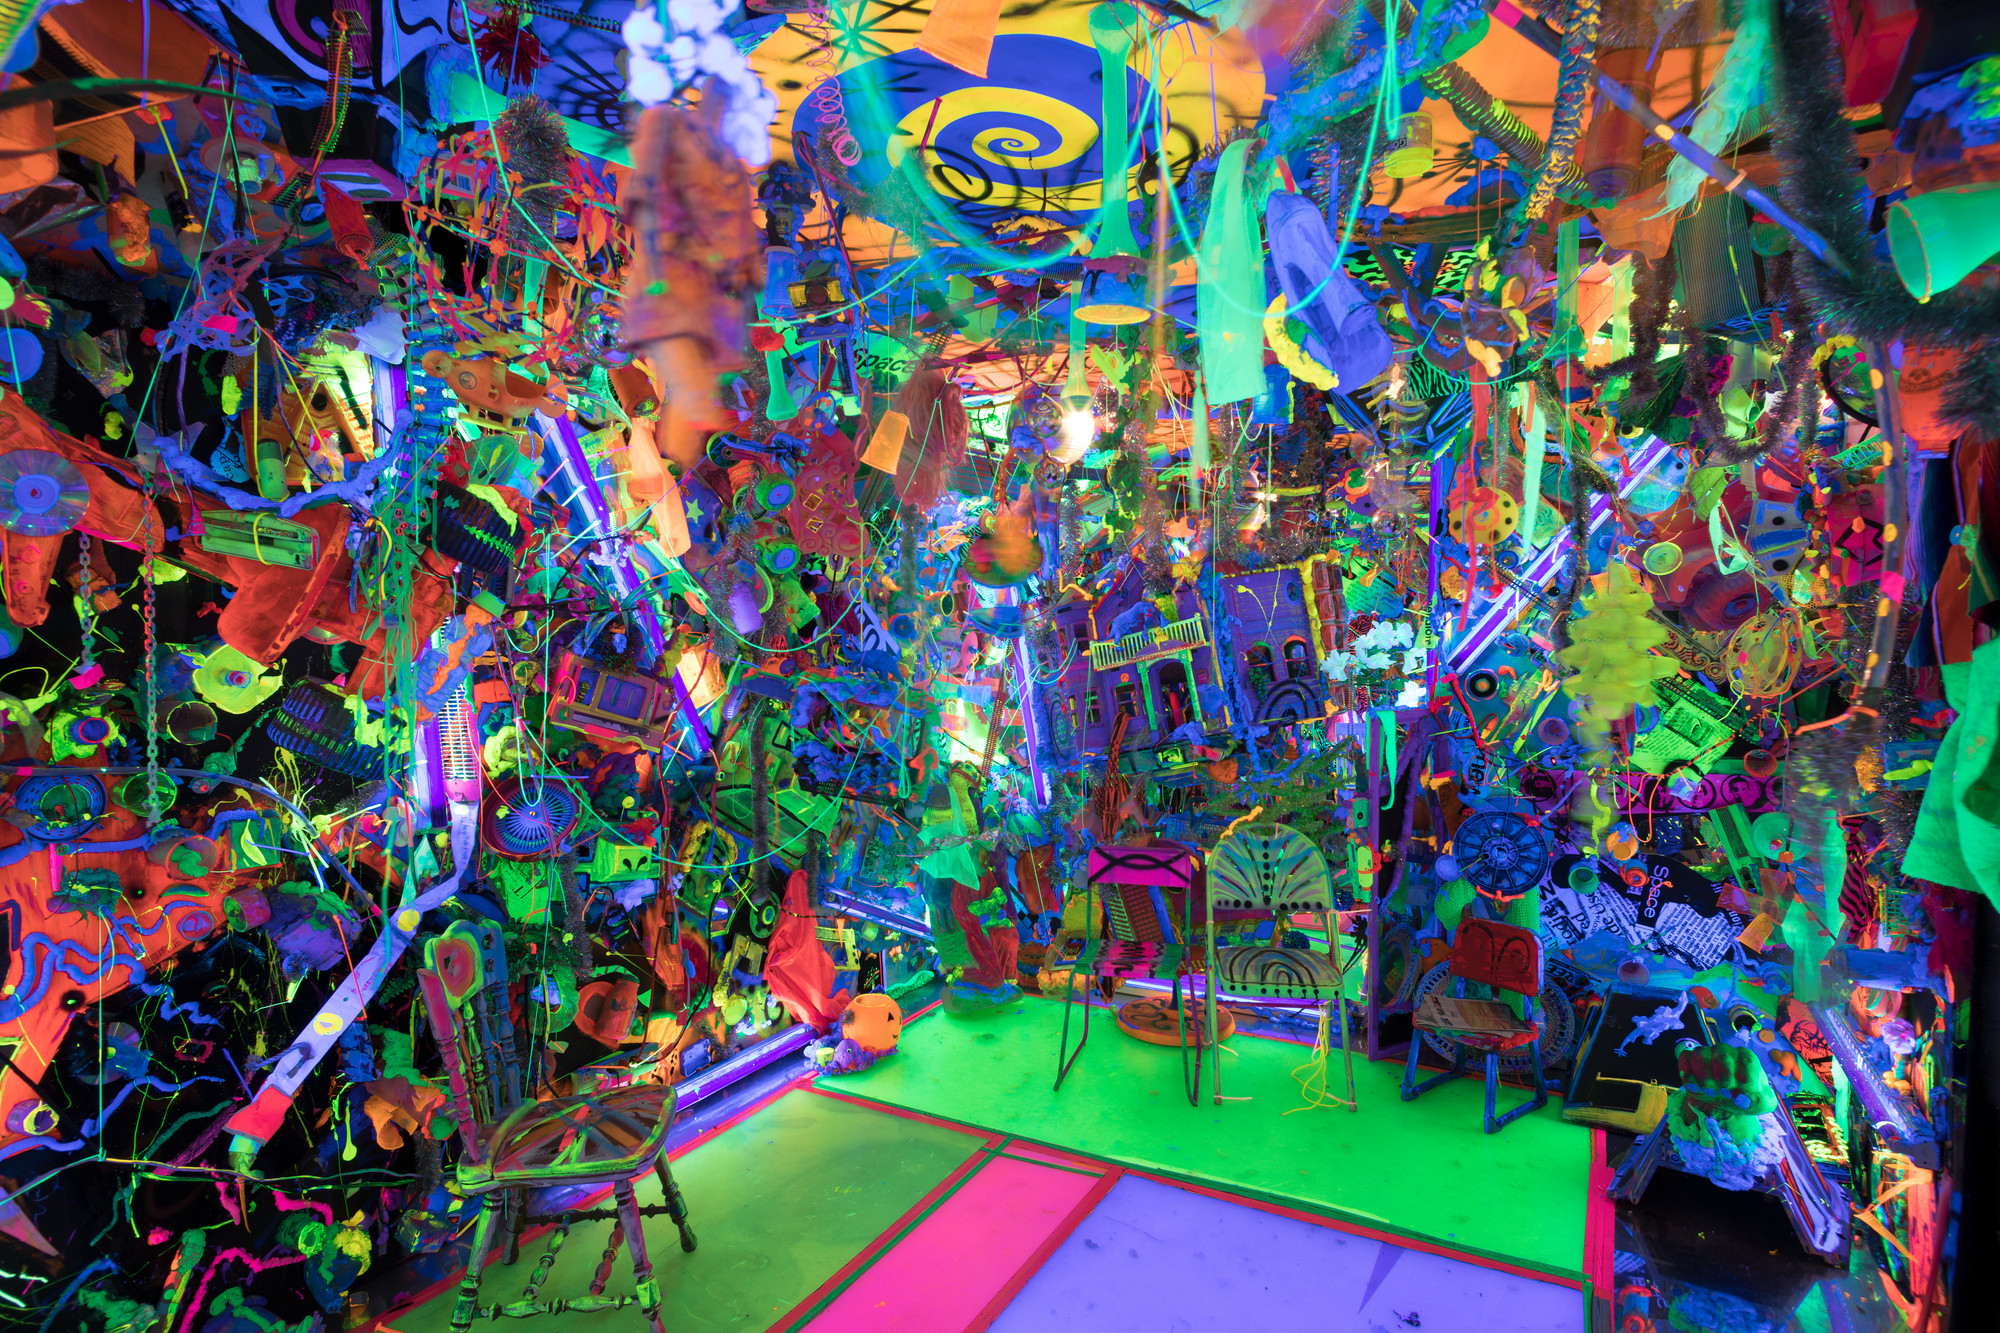 Installation view of Club 57: Film, Performance, and Art in the East Village, 1978–1983, The Museum of Modern Art, New York, October 31, 2017–April 1, 2018. Shown: Kenny Scharf. Cosmic Closet. 1980s/2017. Multimedia installation. Courtesy the artist. Photo: Robert Gerhardt